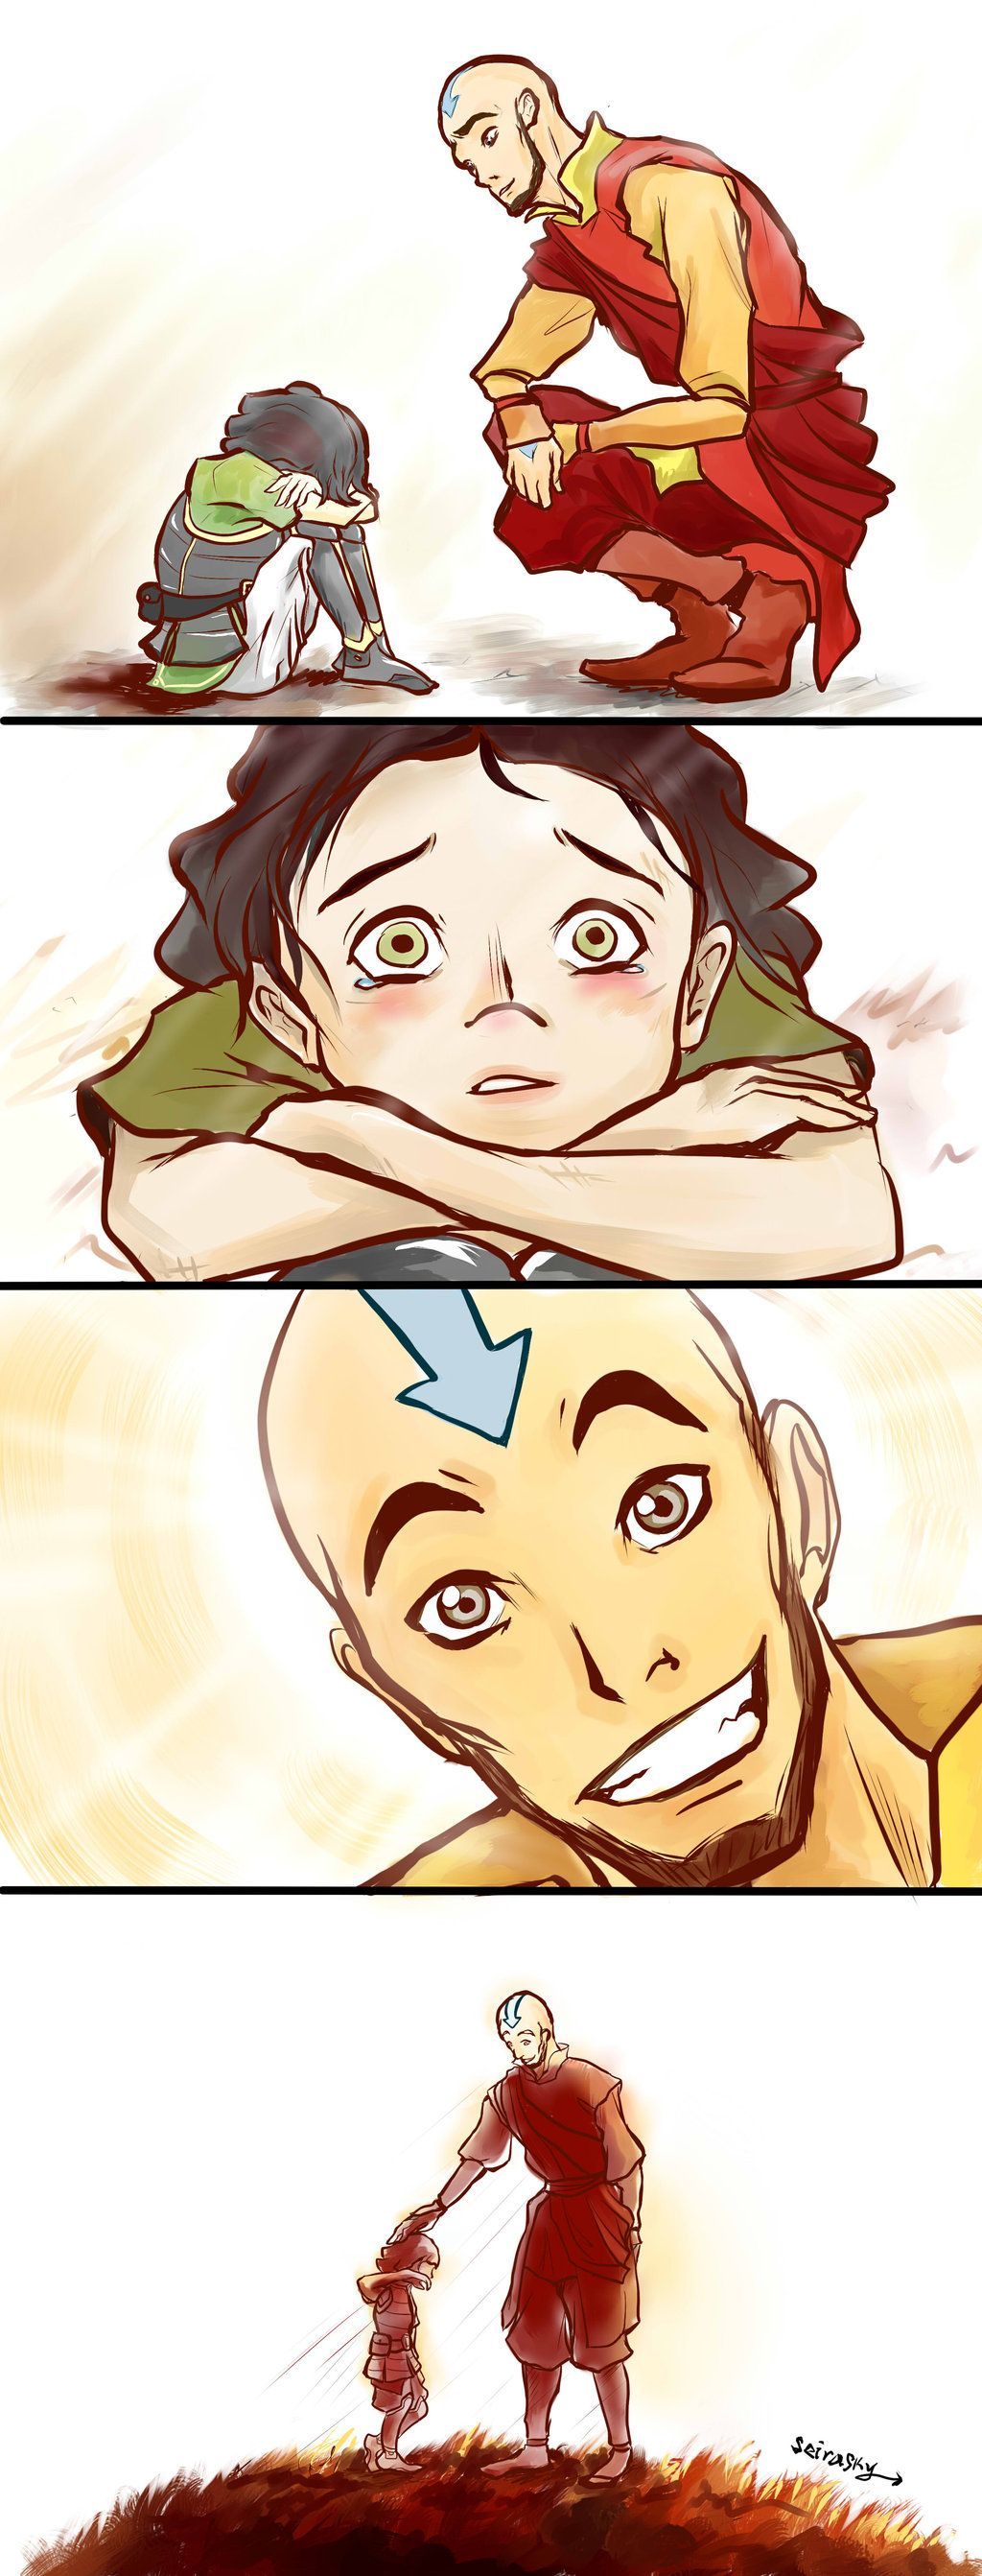 Aang's smile :) same as the boy in the iceberg — teearrsss